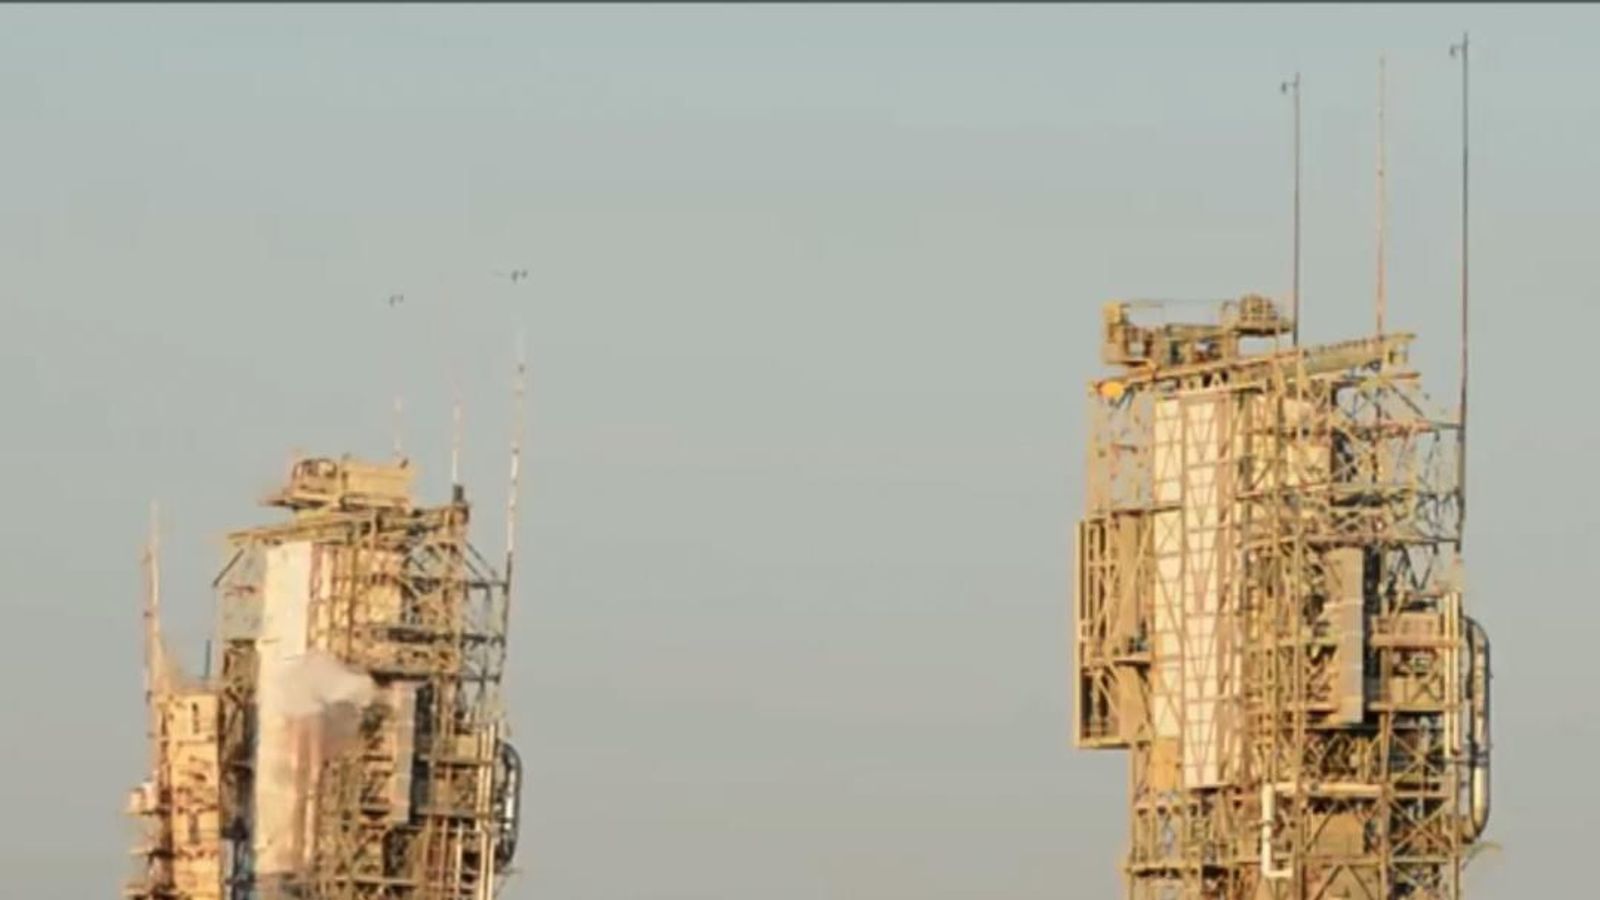 Cape Canaveral launch towers demolished ahead of new space exploration